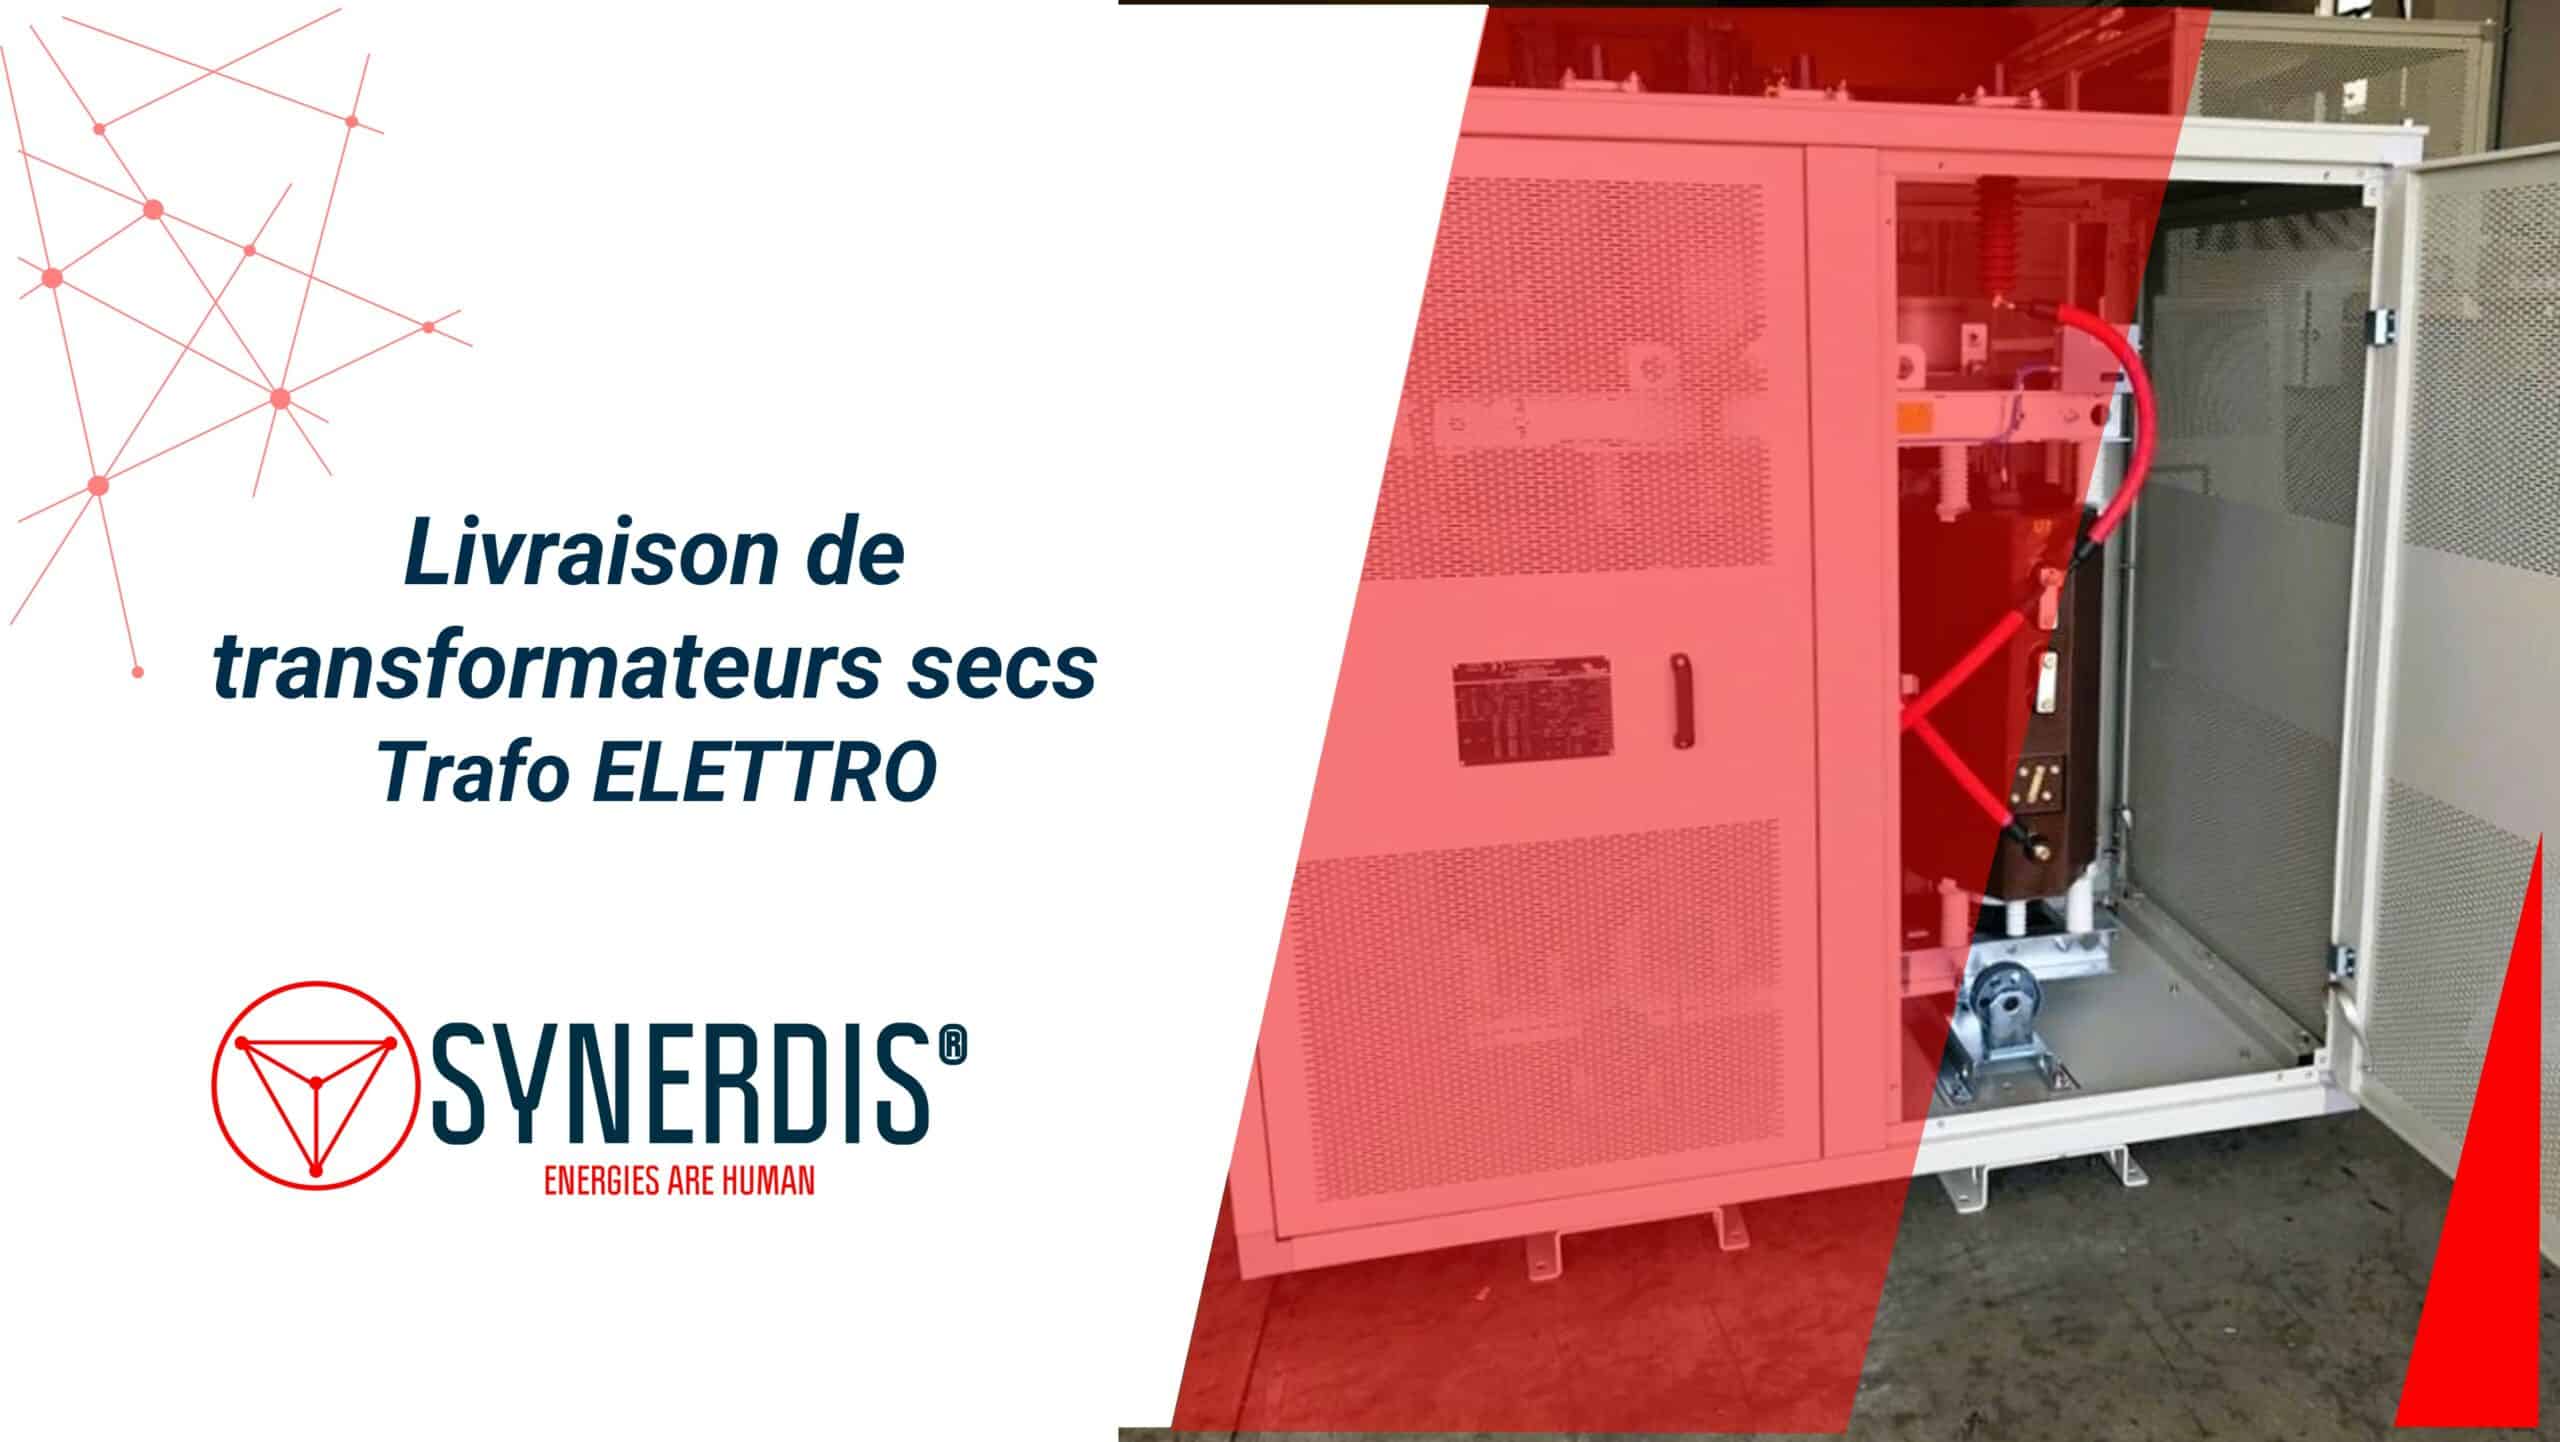 Delivery of Trafo ELETTRO dry-type transformers for major French manufacturers